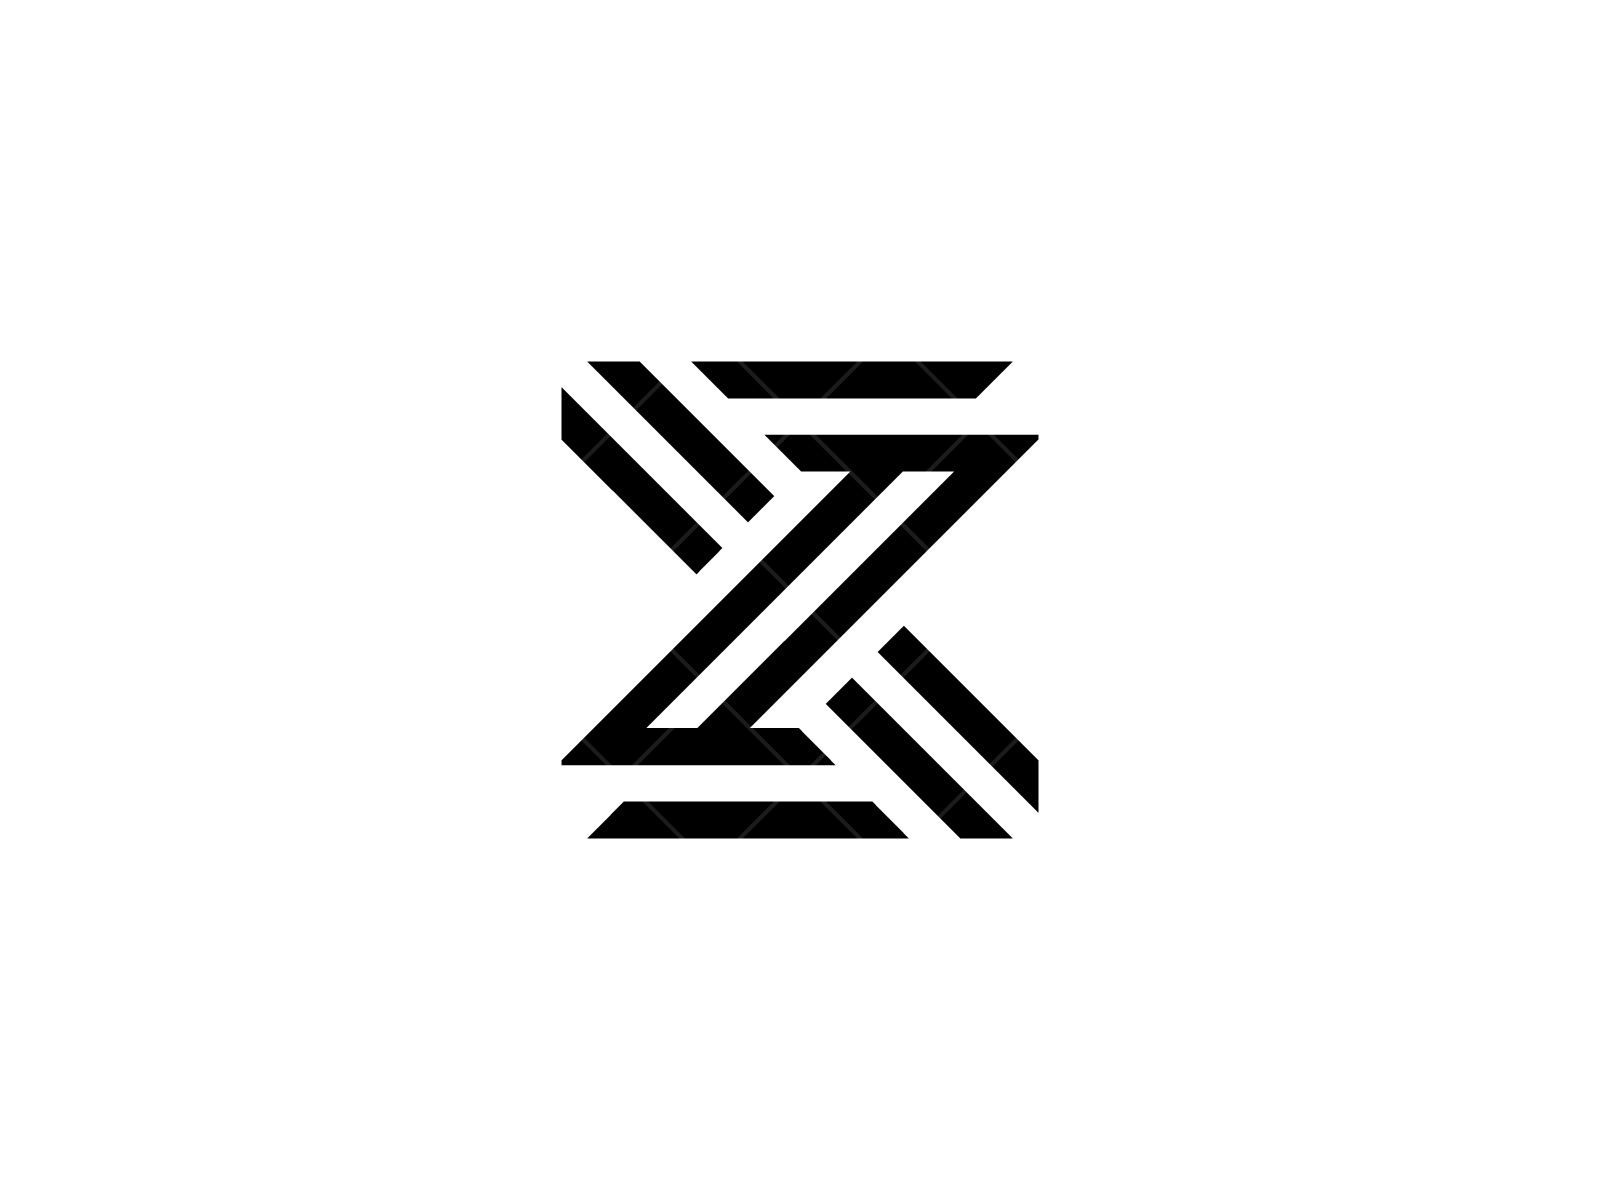 Zx Logo designs, themes, templates and downloadable graphic 